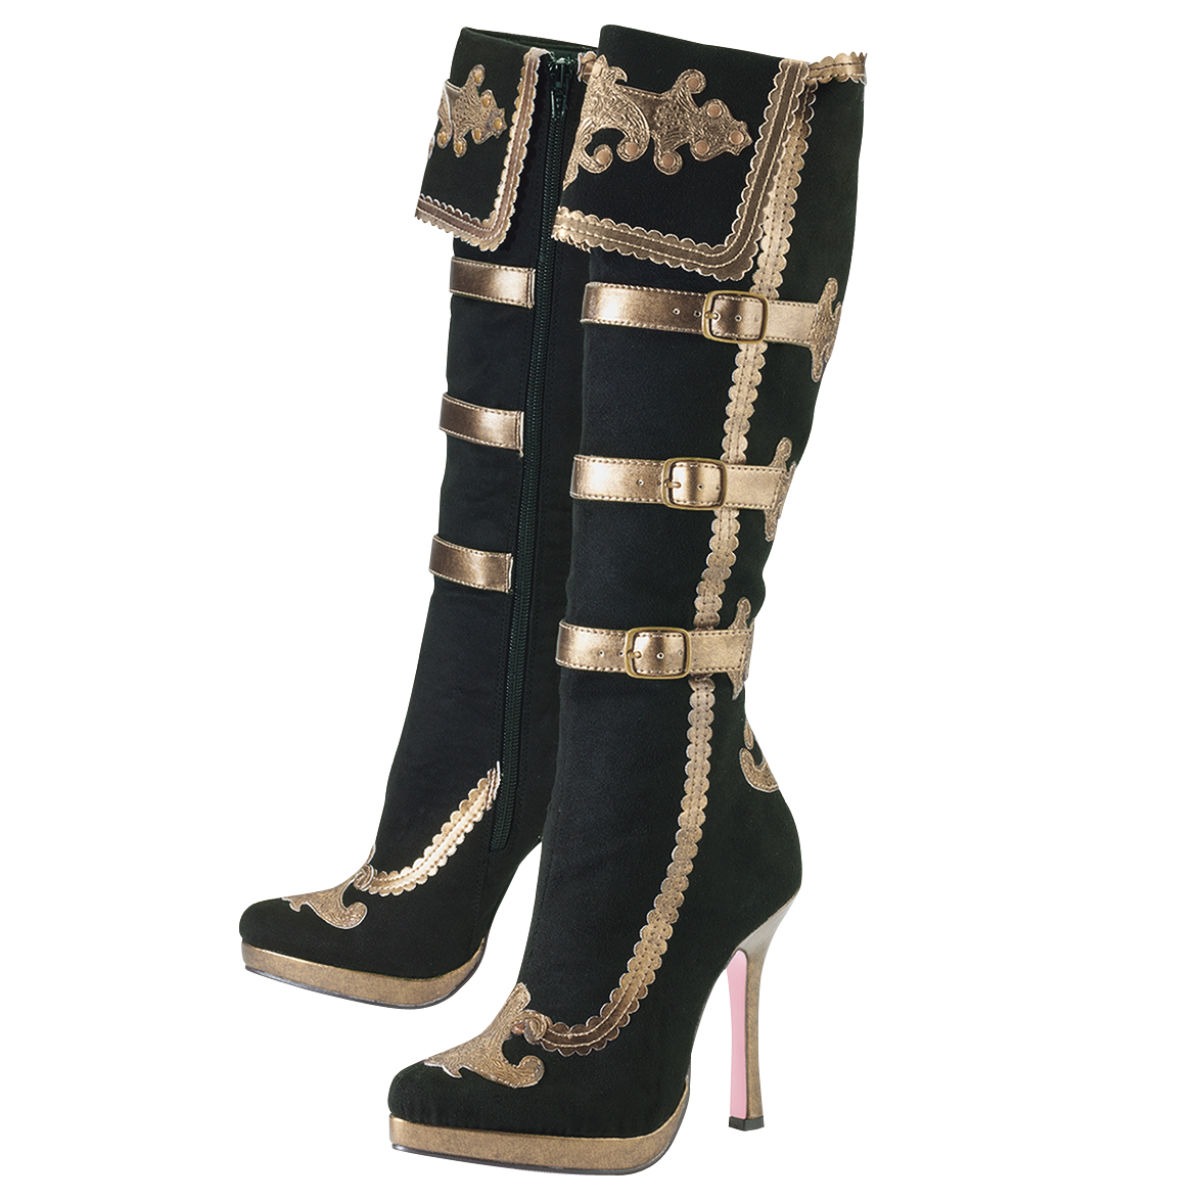 Lady Corsair Boots steampunk buy now online